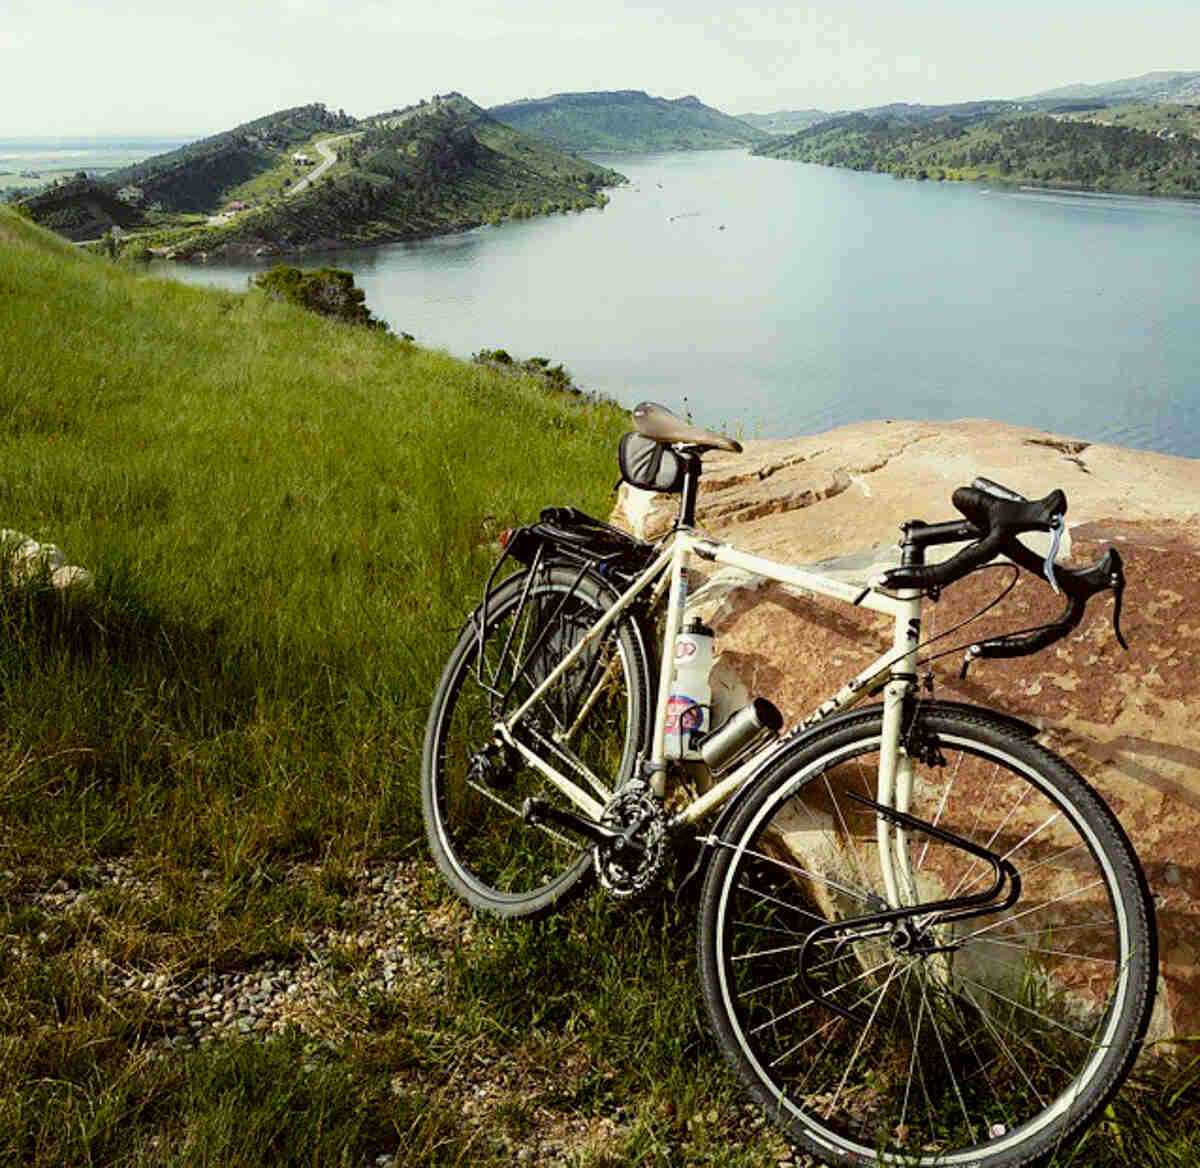 Right side view of a Surly Travelers Check bike, on a grass hilltop and leaning on a rock, with a mountain lake below